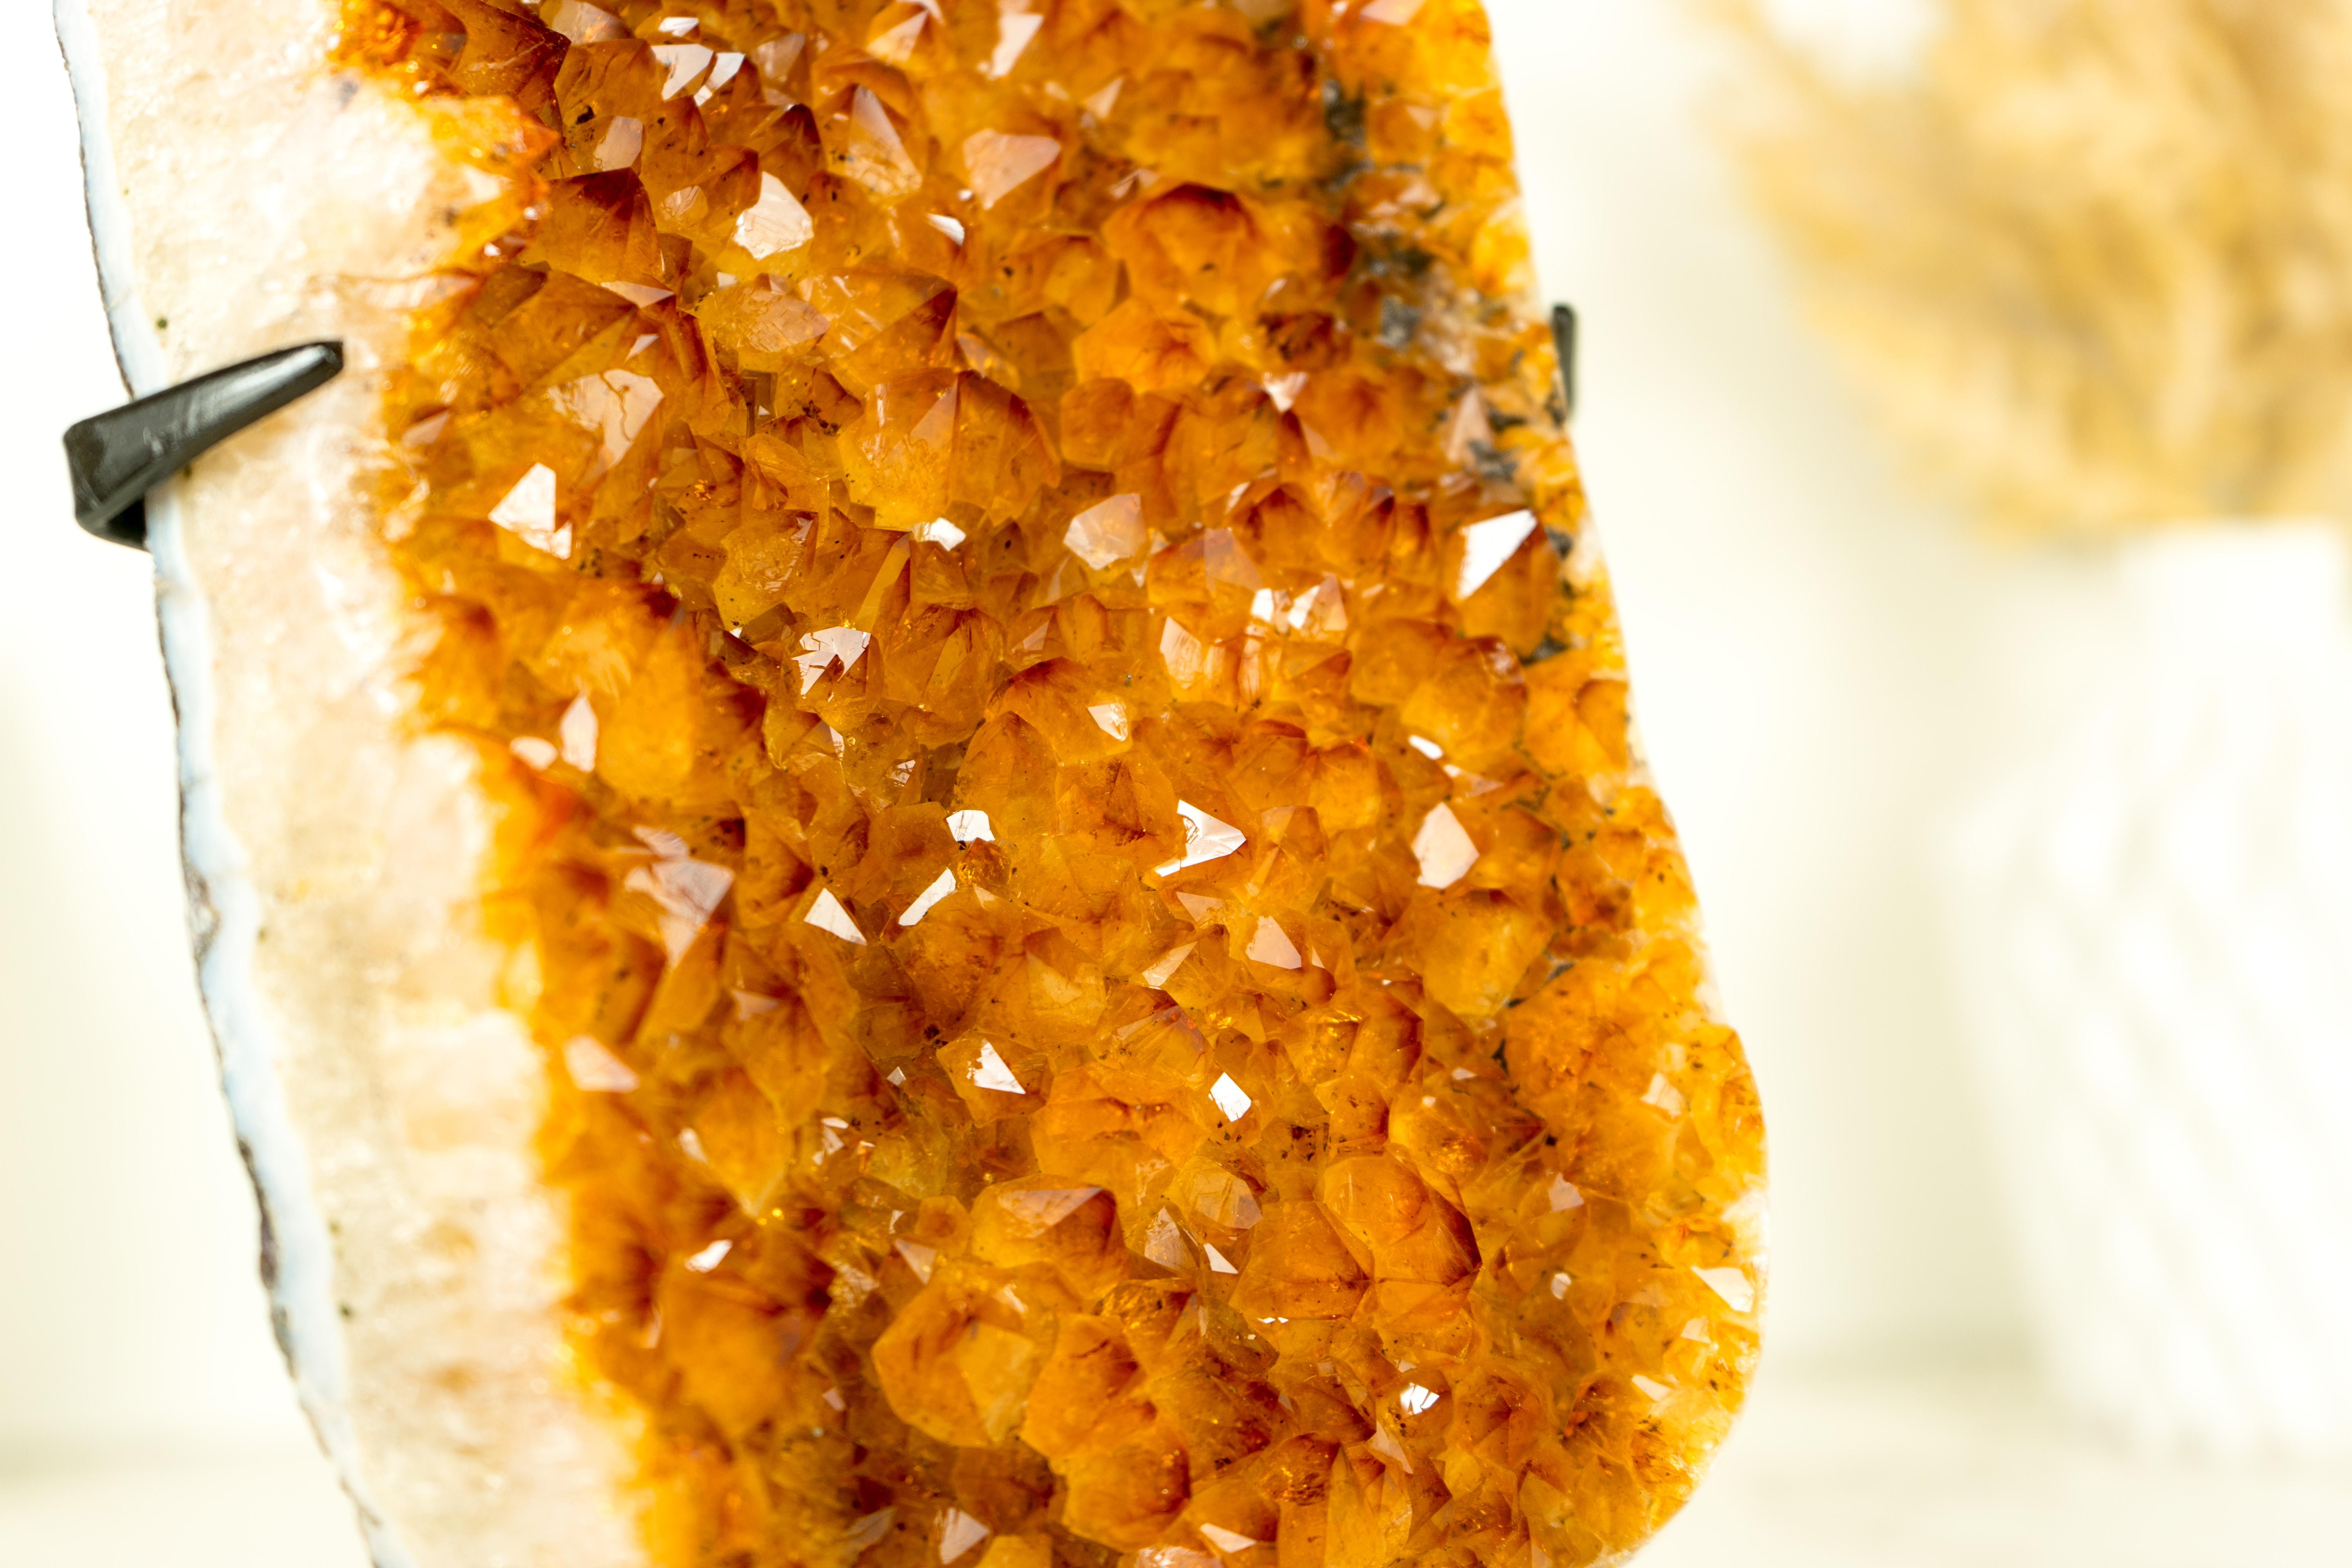 With its beautiful formations, radiant Golde Orange Citrine color, and wonderful aesthetics, this Citrine Specimen is the perfect addition to your crystal collection or a gorgeous decor piece for your console, table, or shelf.

The Golden Citrine is